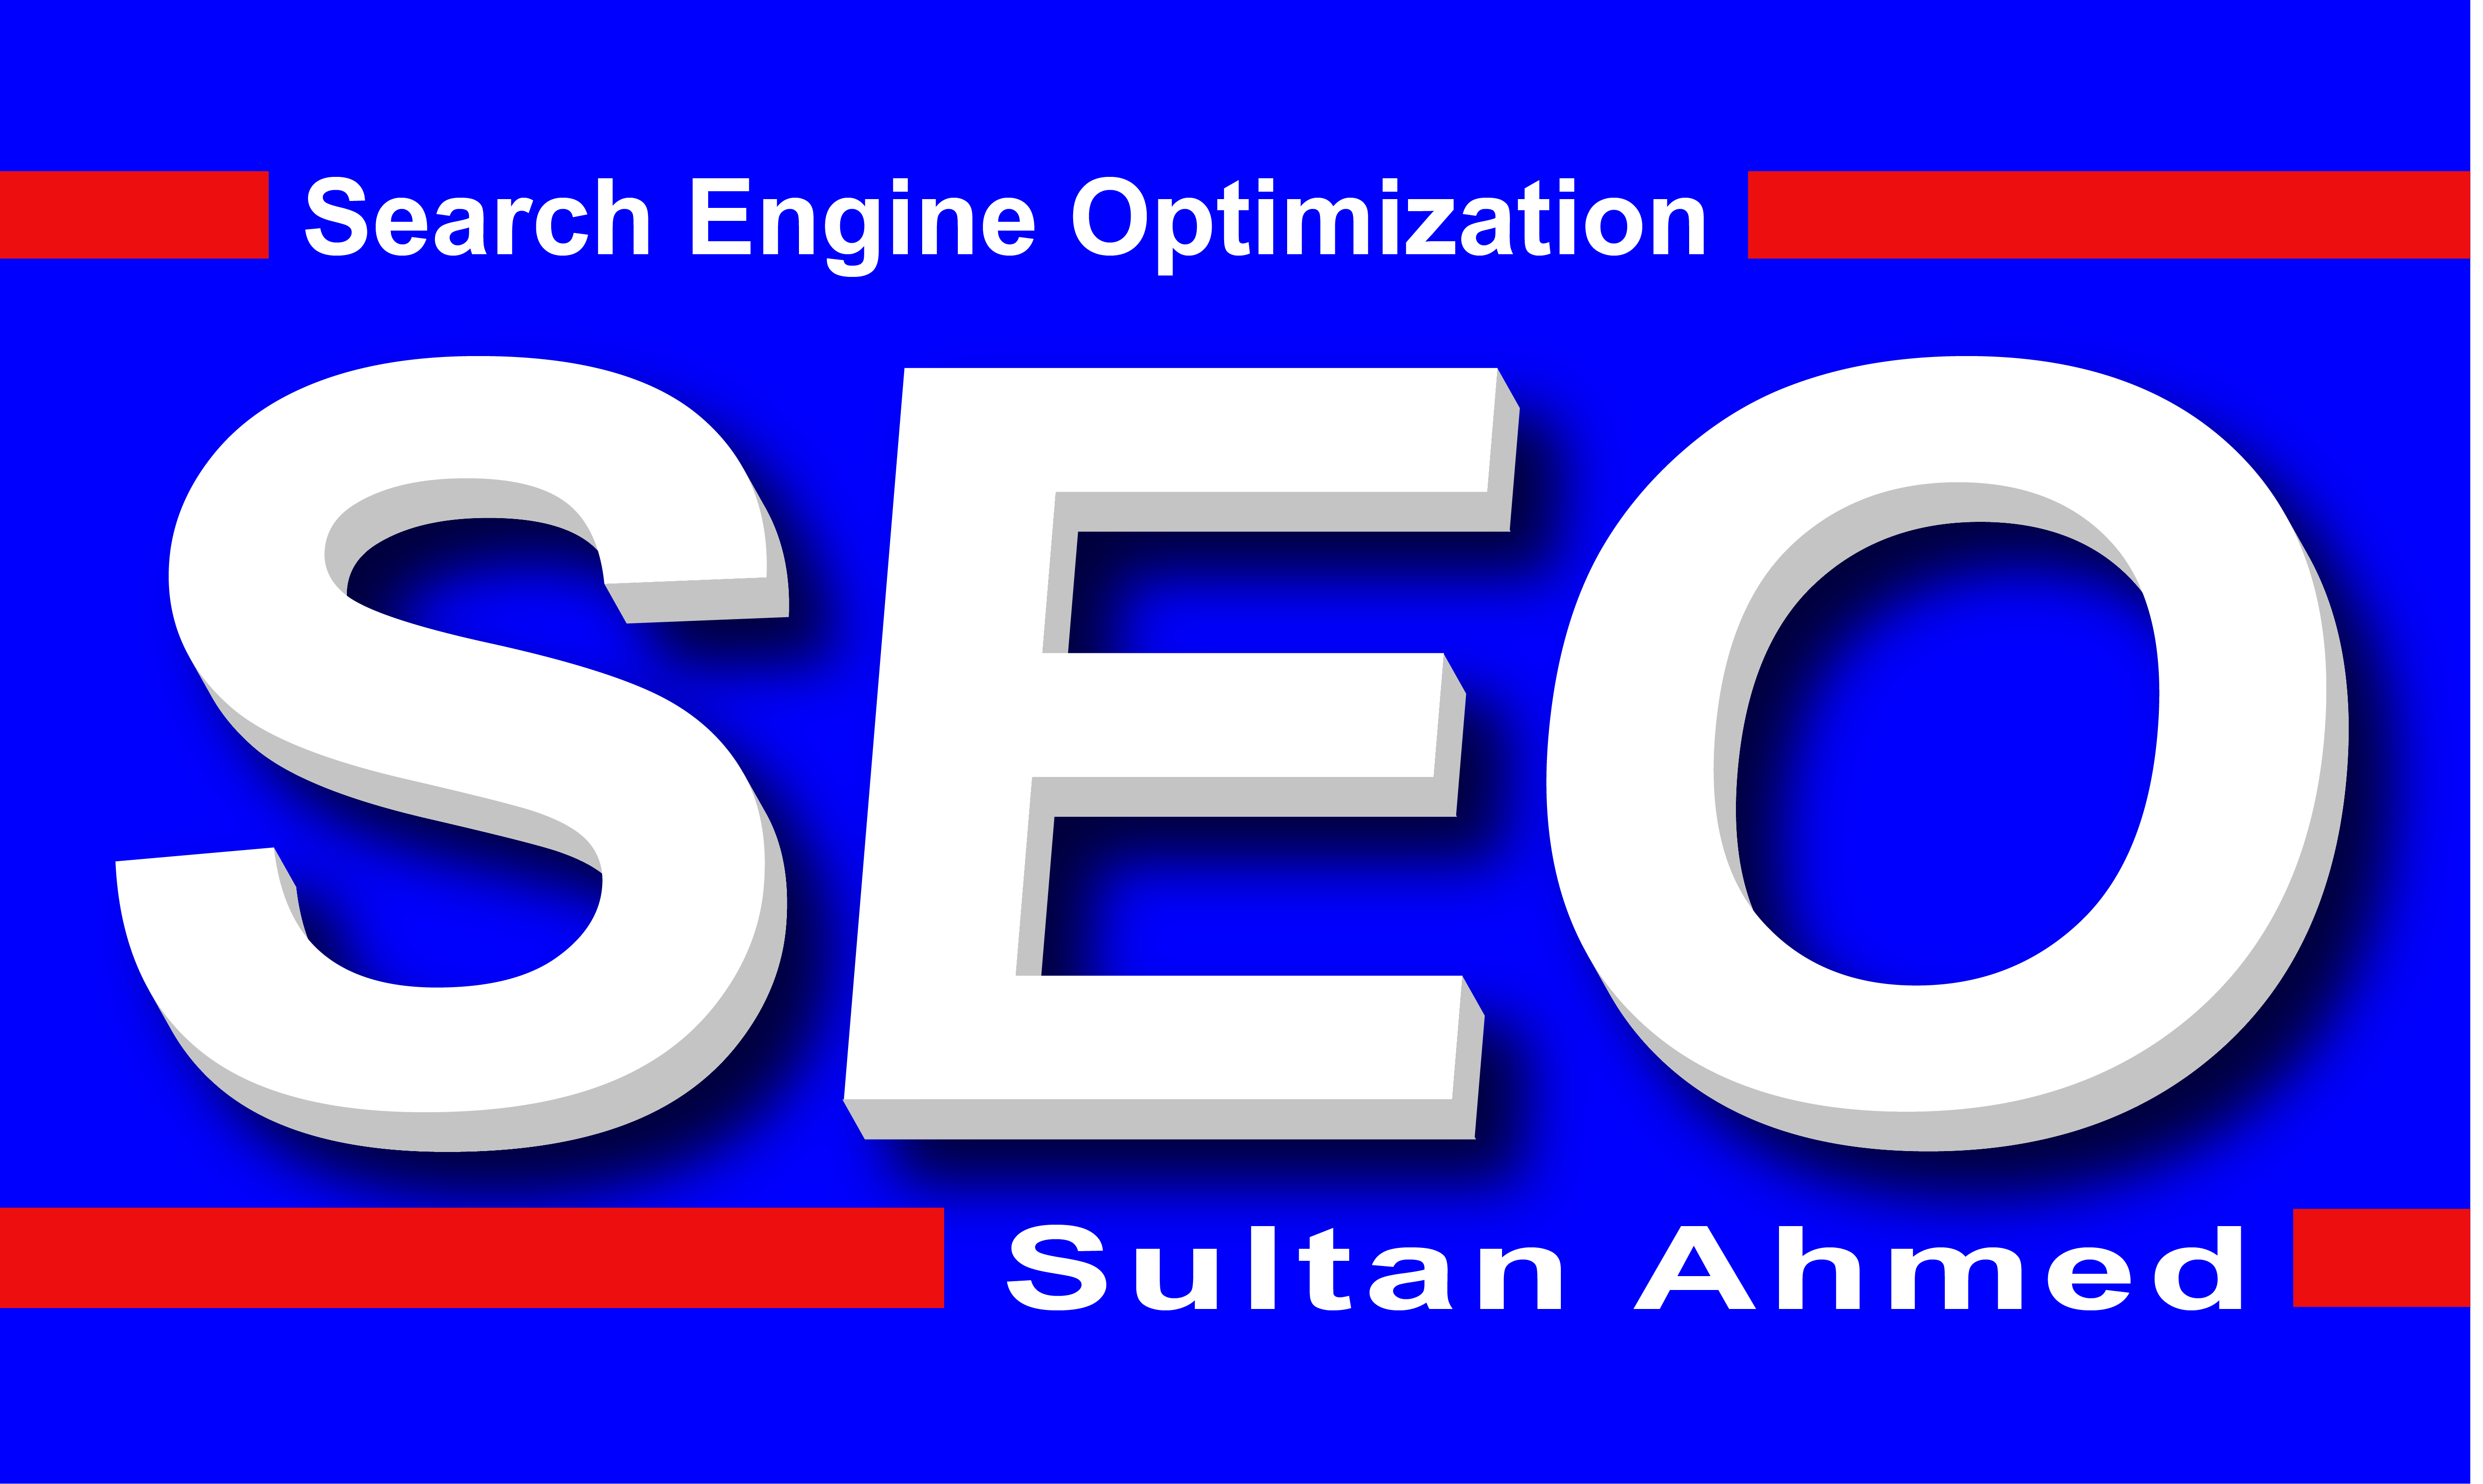 Search Engine Optimization

Sultan Ahmed